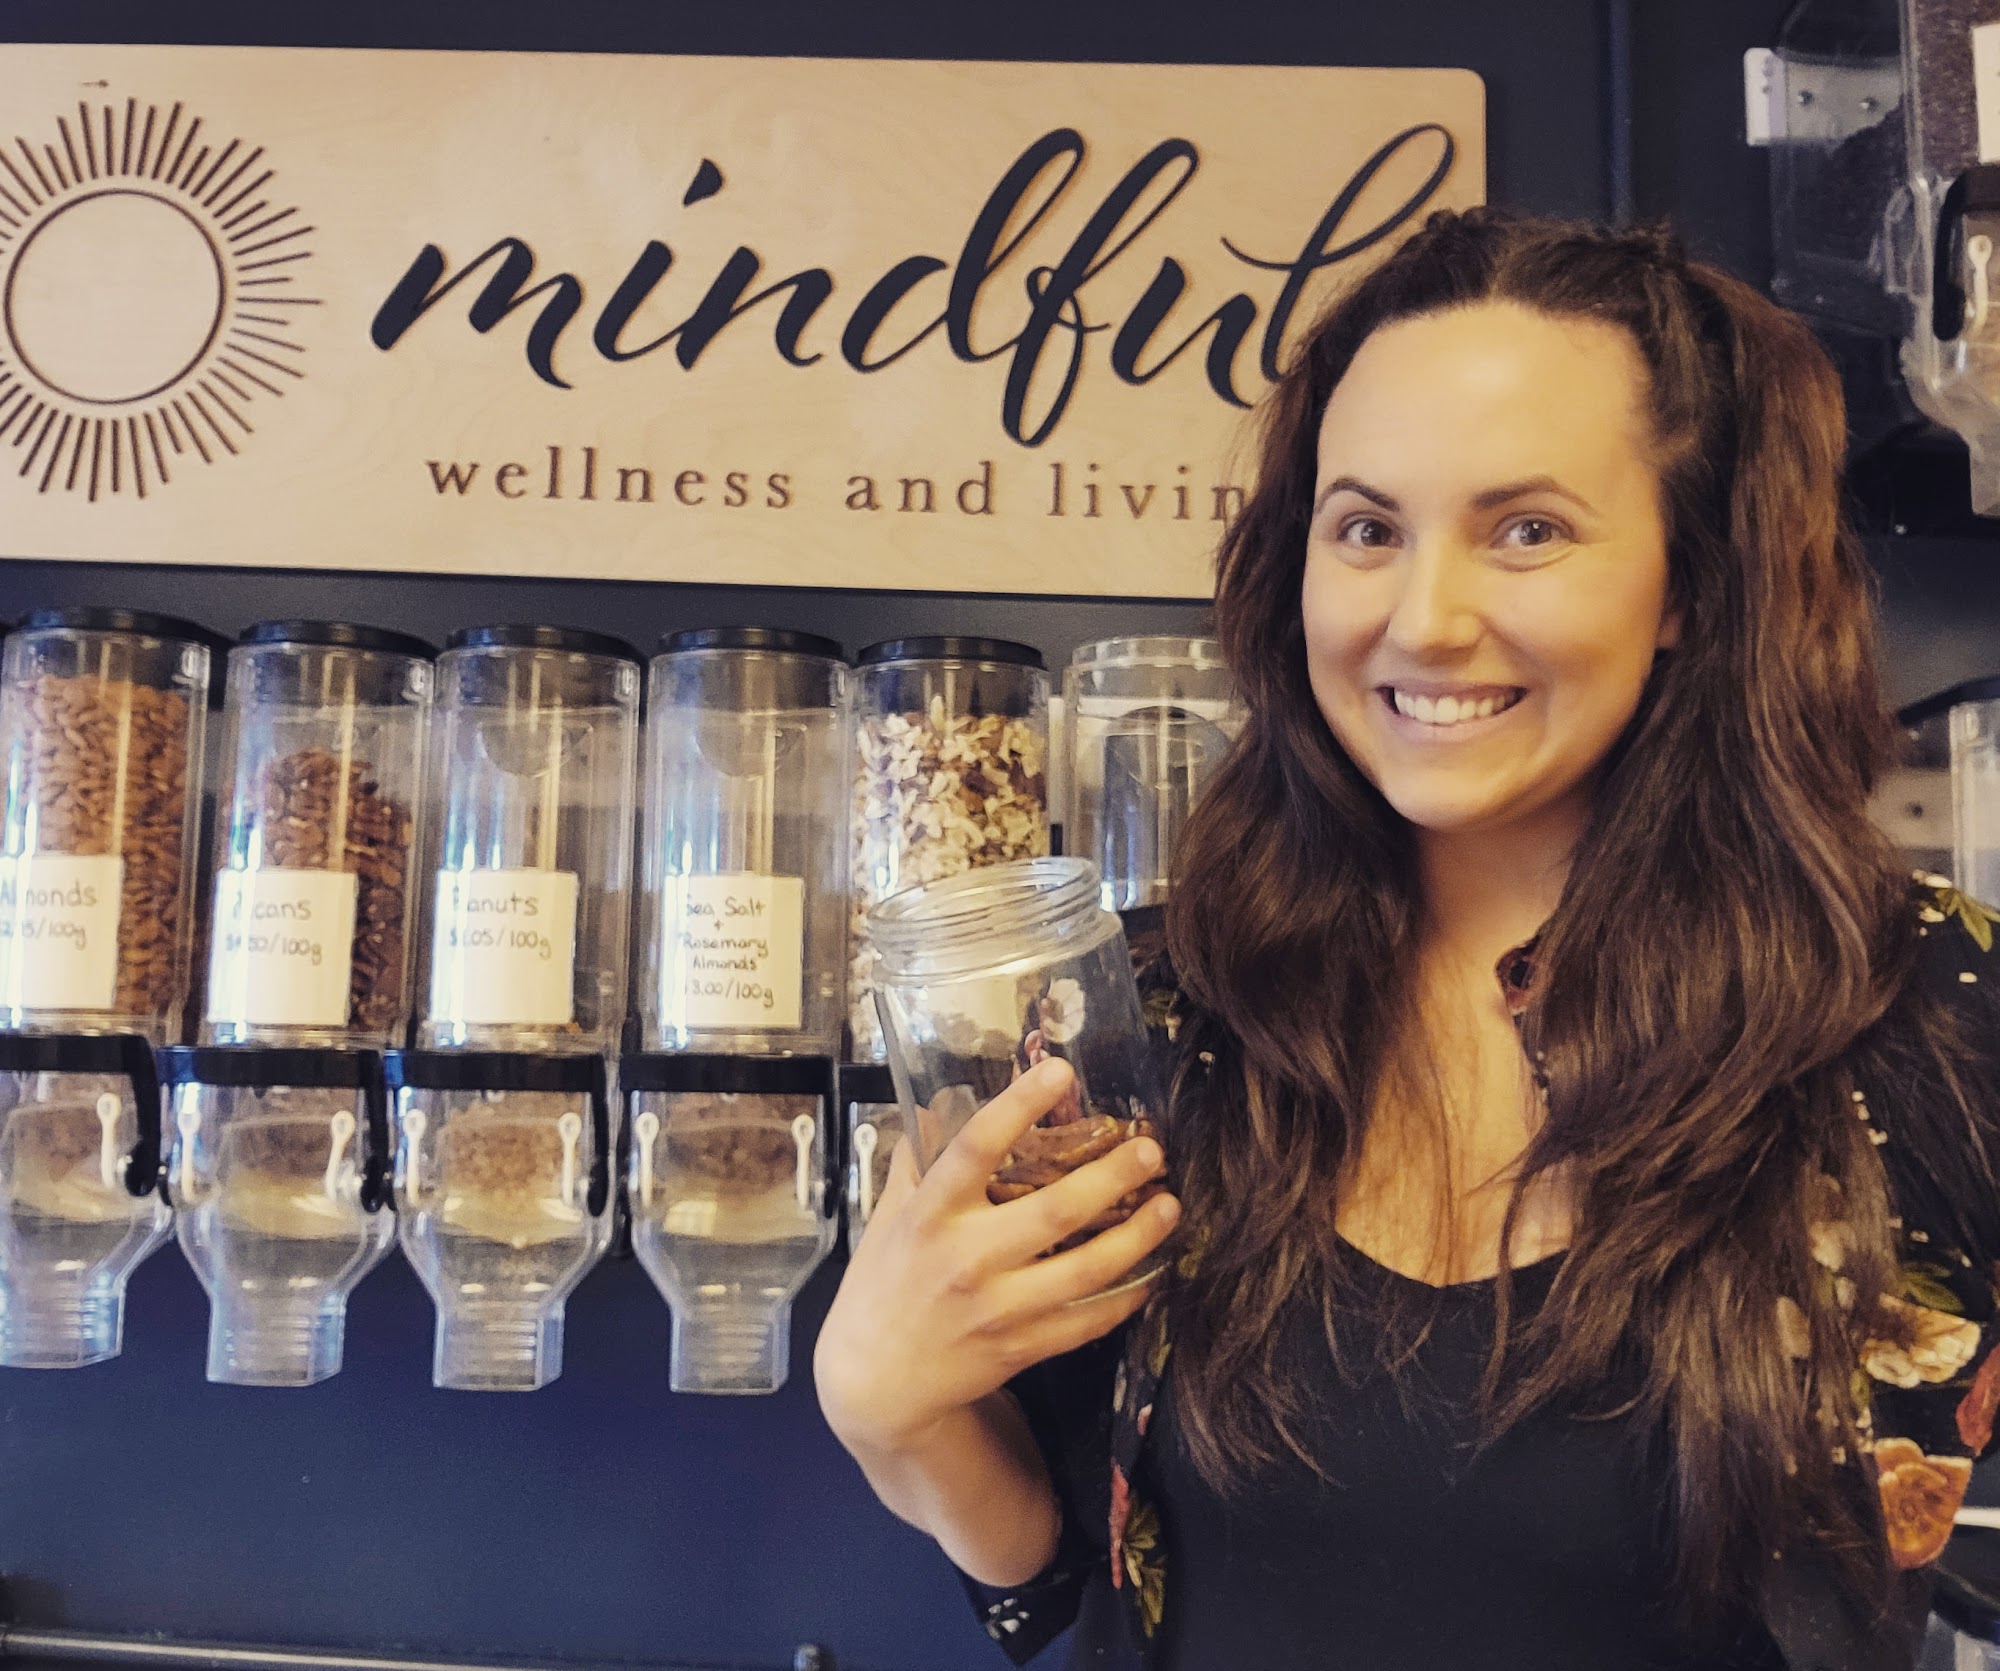 Mindful: wellness and living 5013 50 Ave, Cold Lake Alberta T9M 1P3